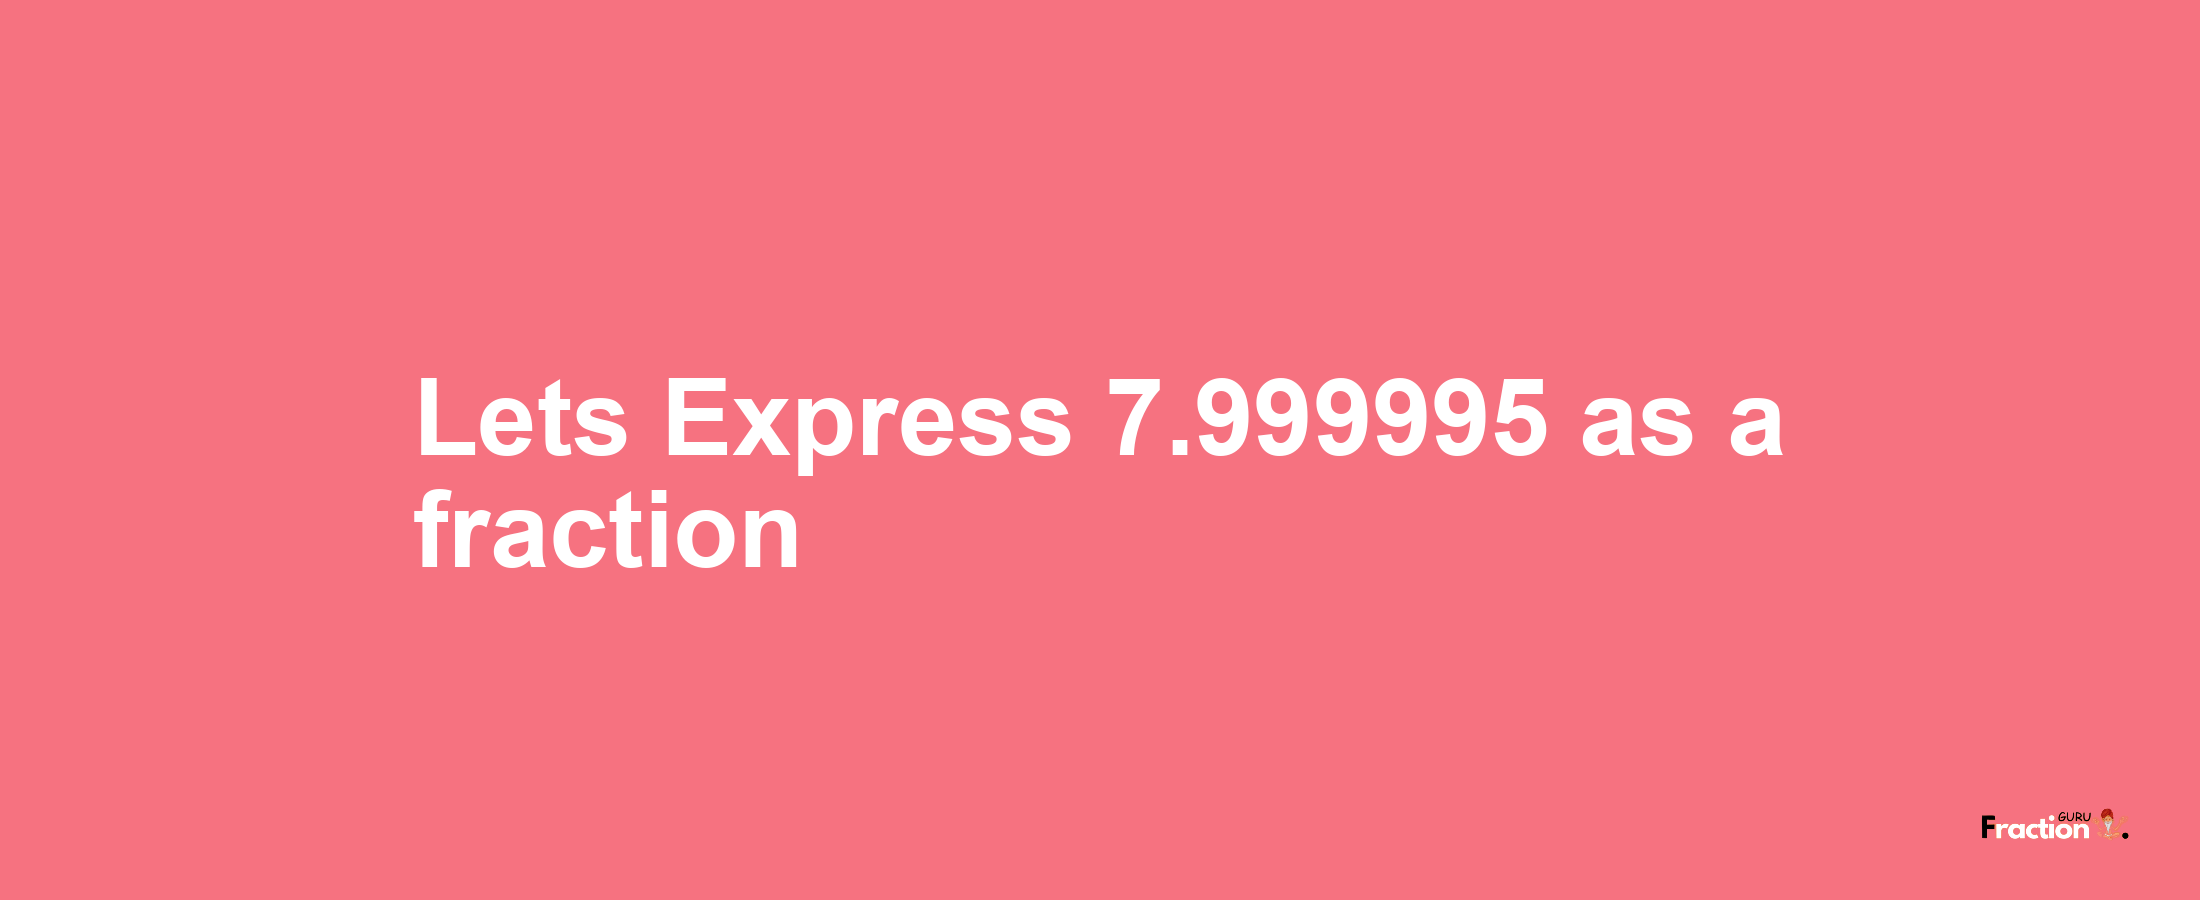 Lets Express 7.999995 as afraction